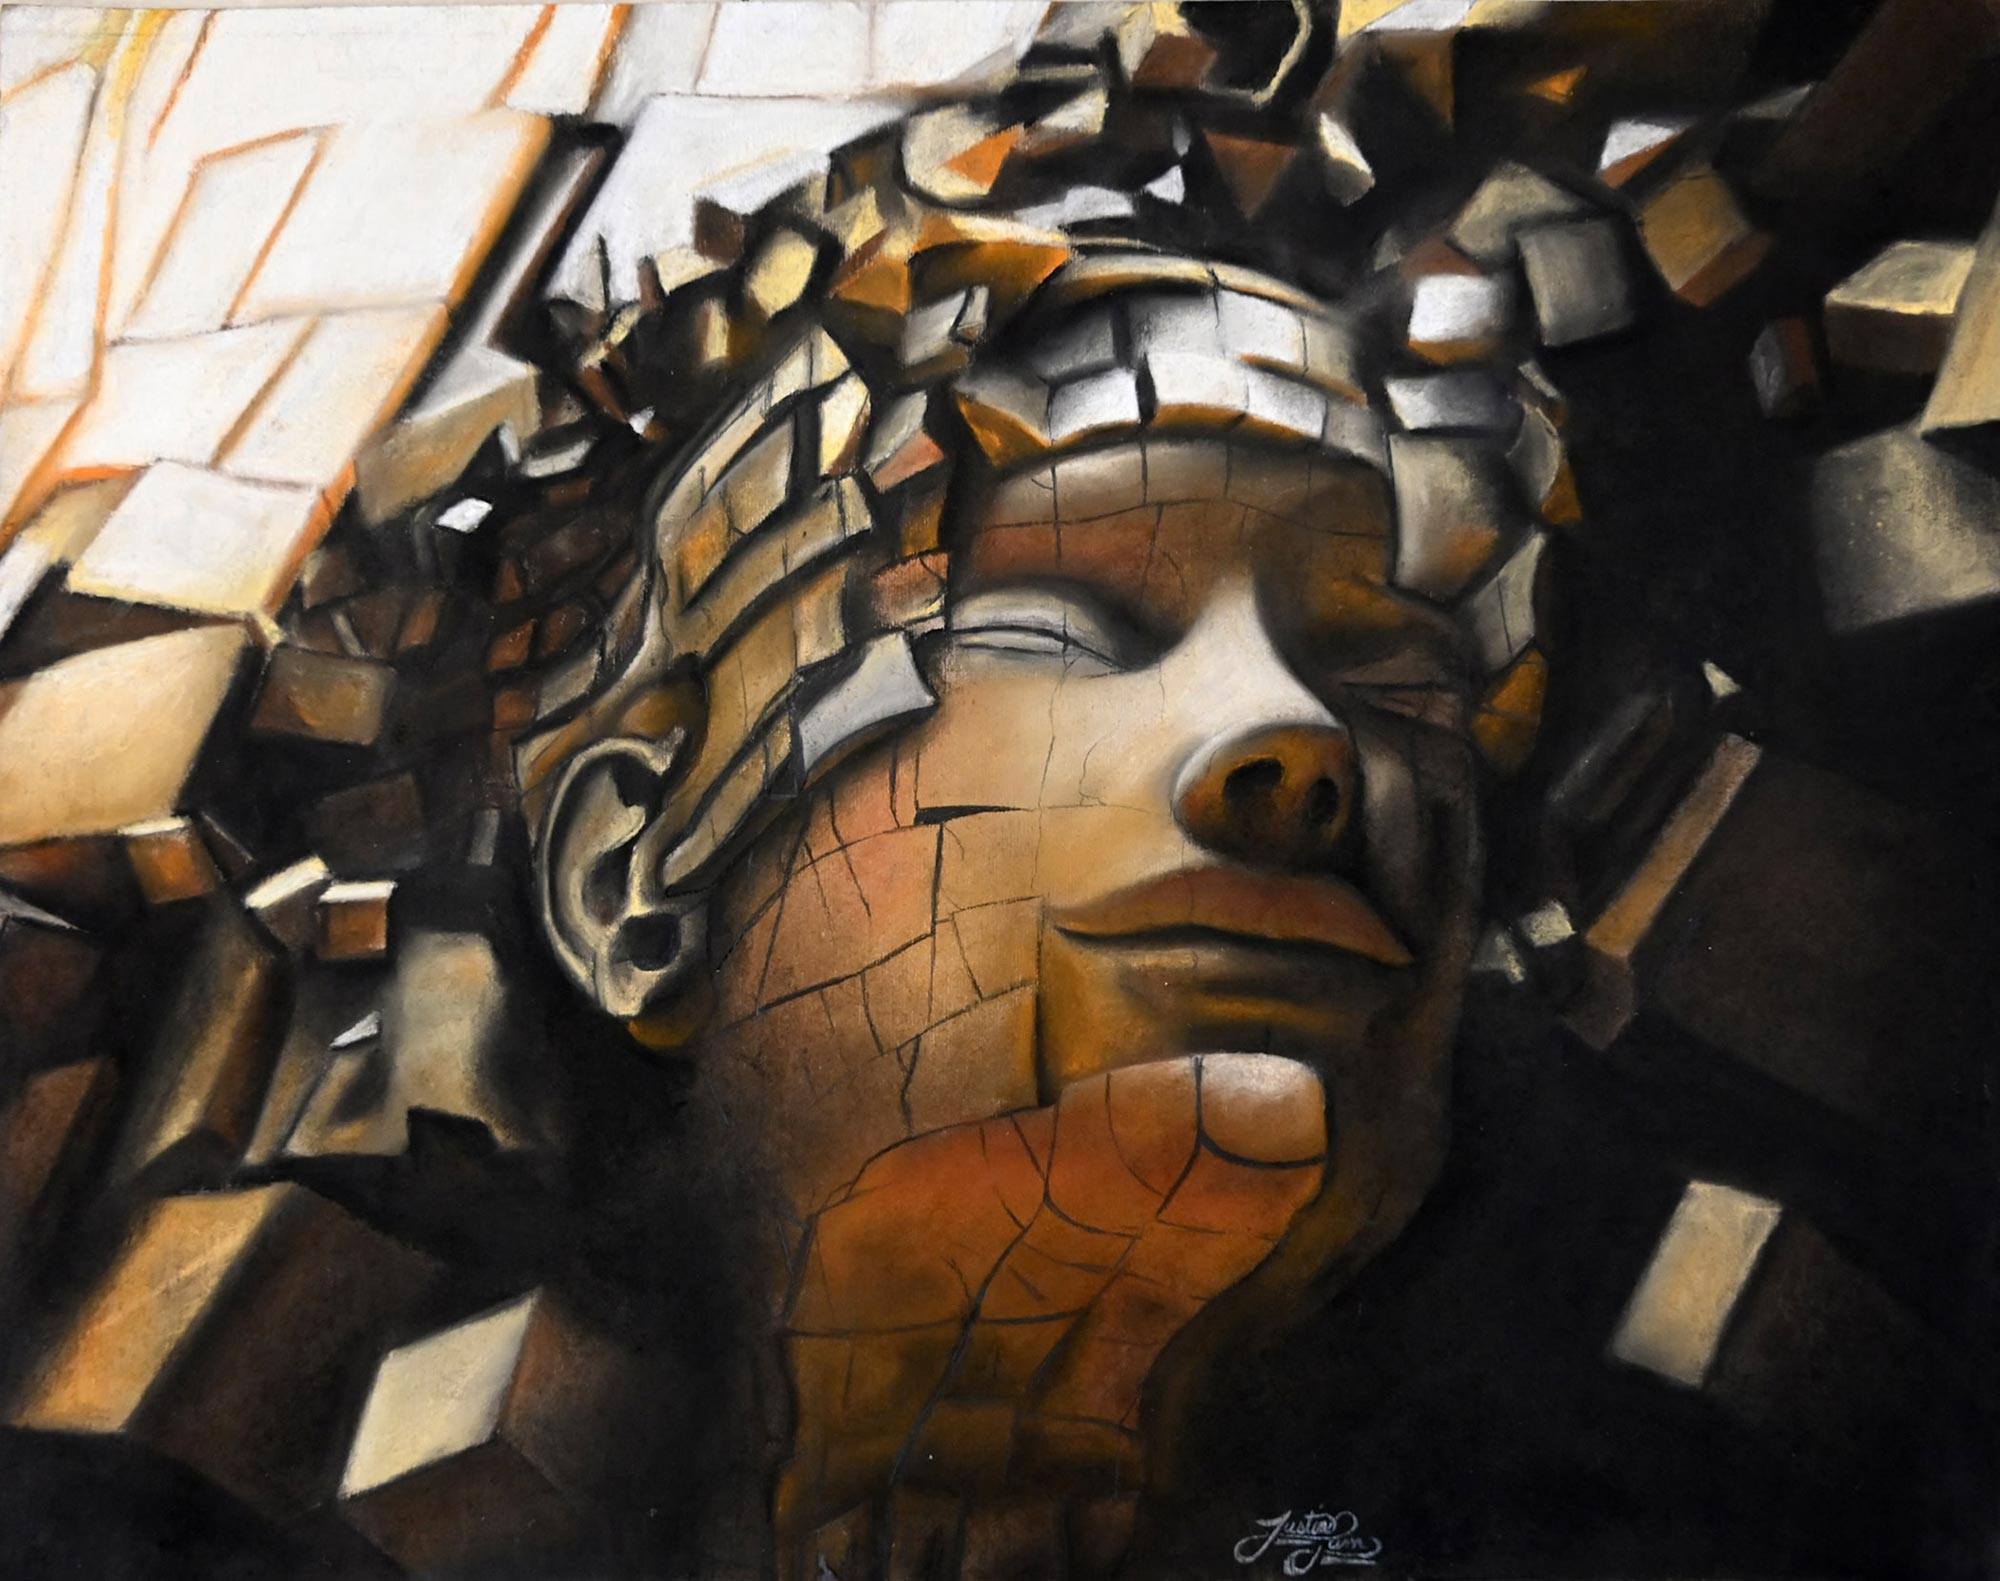 A painting of a person 's head crumbing into blocks